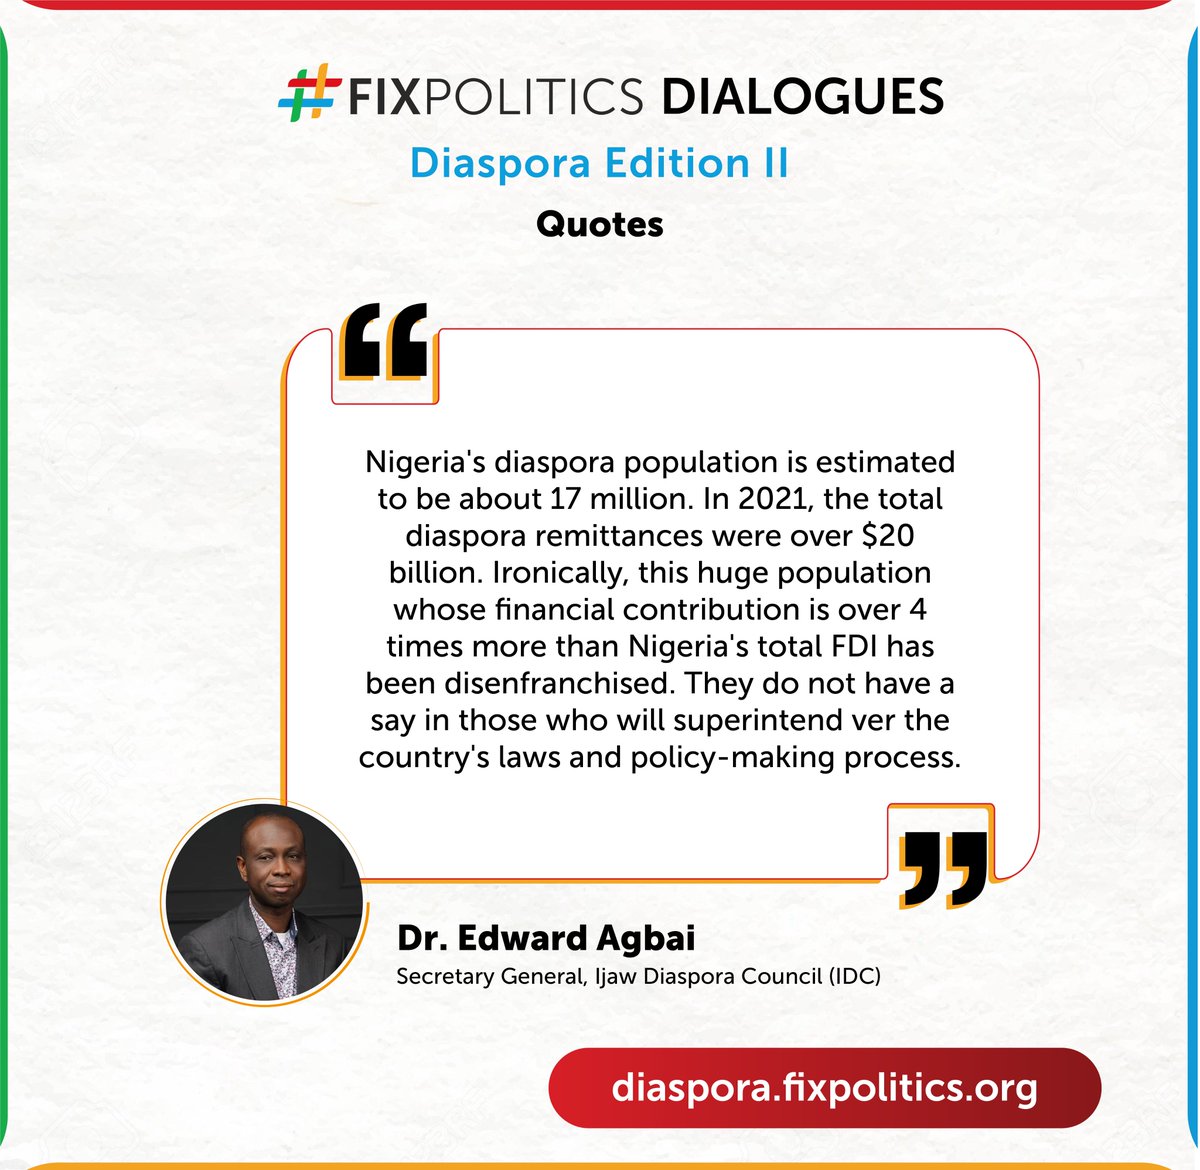 'In 2022, the total diaspora remittances were over $20 billion. Ironically, this huge population whose financial contribution is over 4 times more than Nigeria's total FDI has been disemfranchised' - @AgbaiEdward at the #FixPolitics Diaspora Dialogue II.